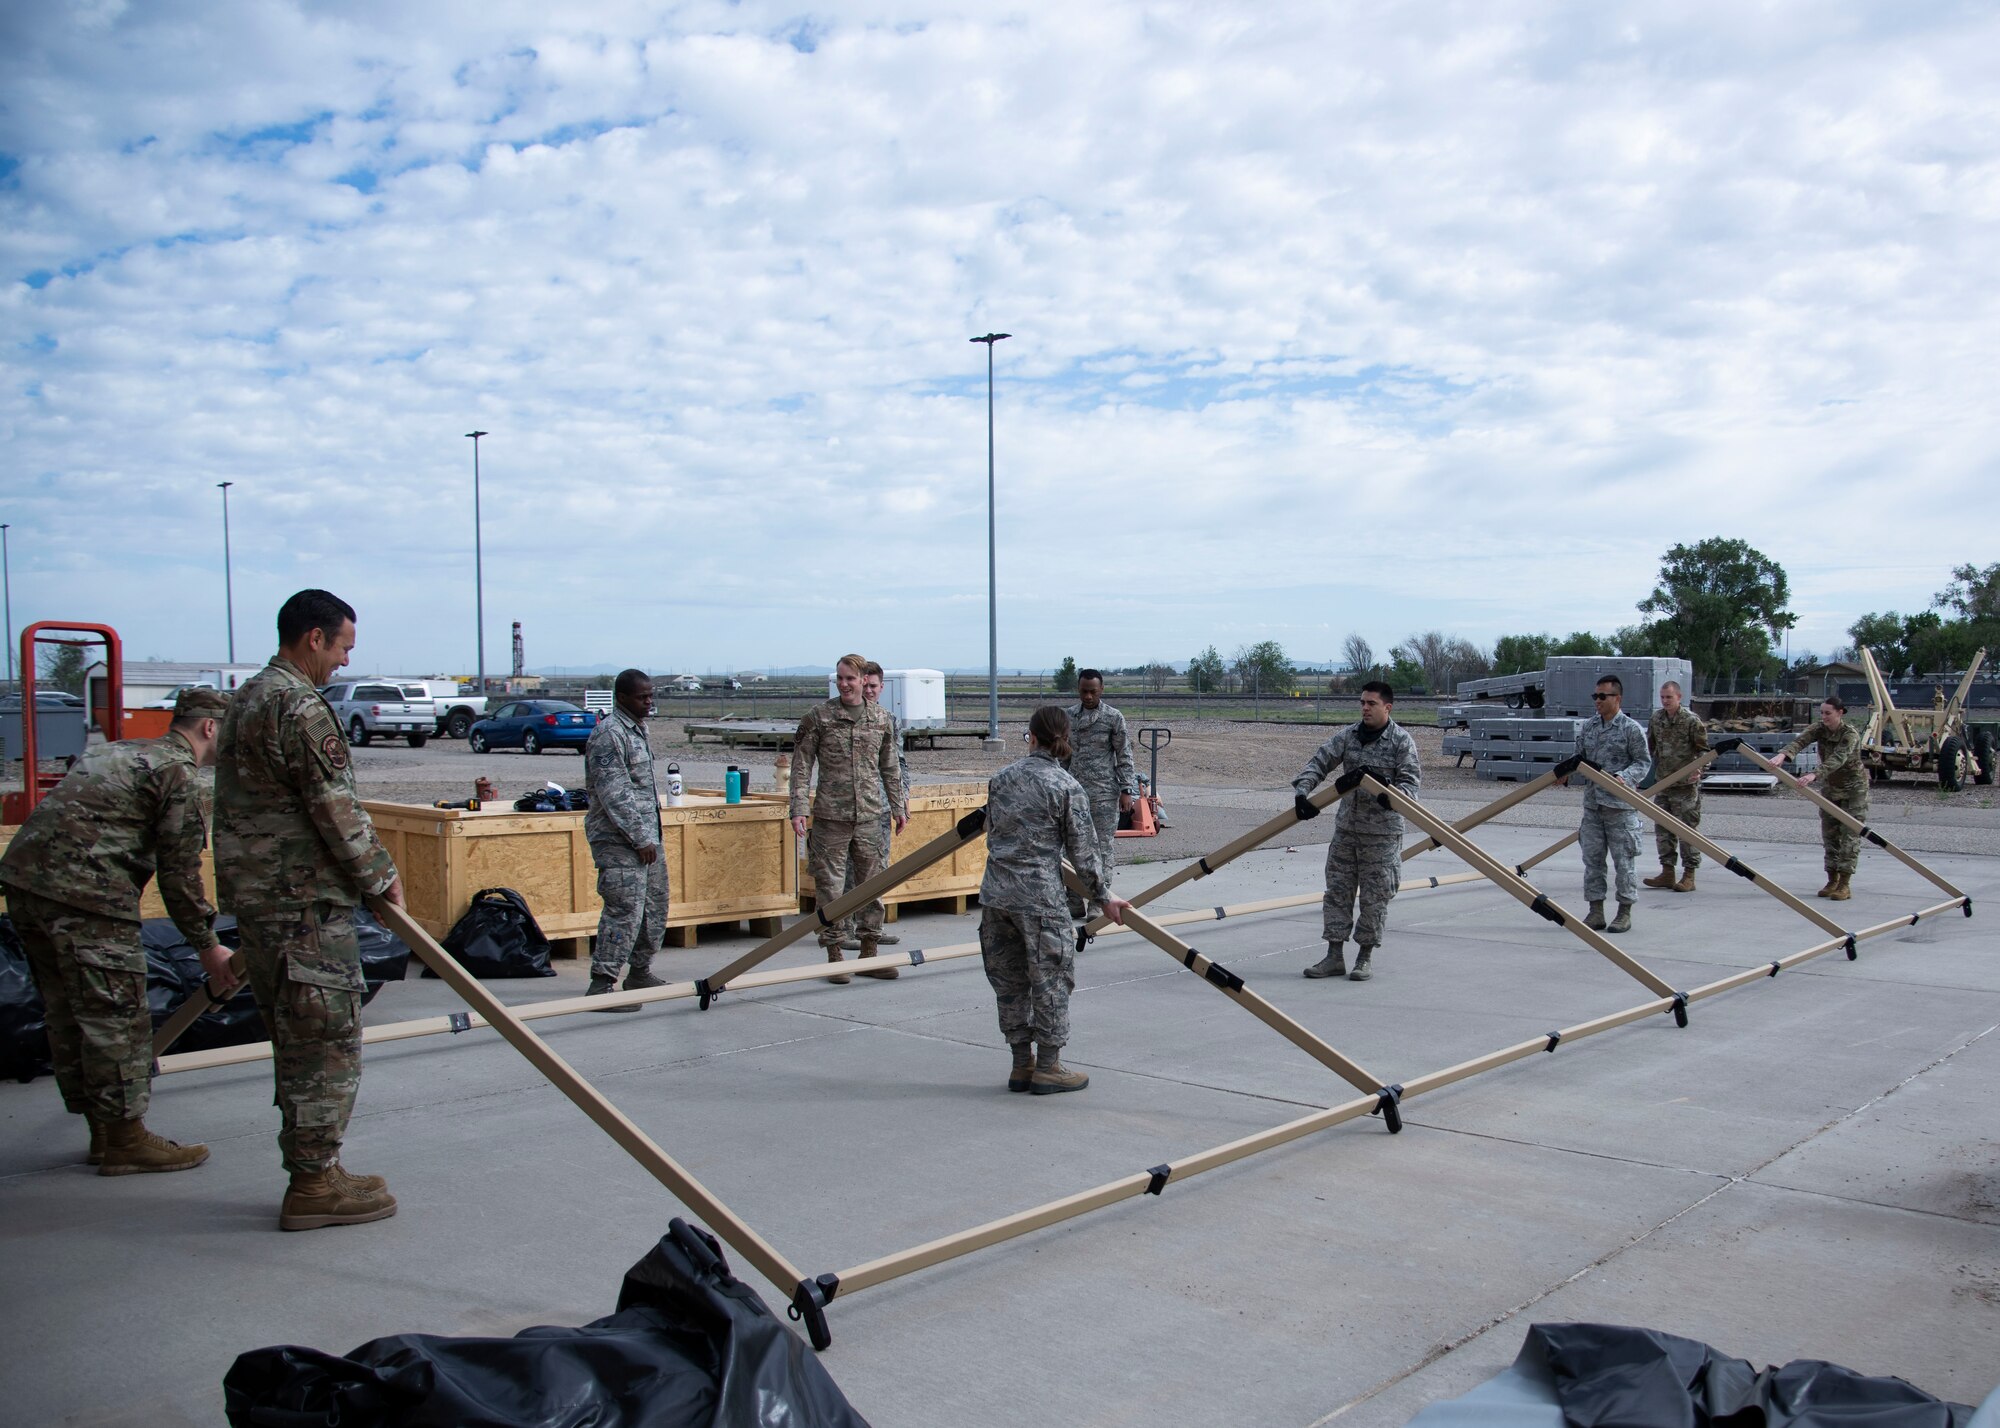 366th Fighter Wing A2 (Intell) Airmen expand the support structure for the TM60 tent, June 3, 2020, at Mountain Home Air Force Base, Idaho,. The TM60 will serve as the Mission Planning Cell in an Agile Combat Employment operation. (U.S. Air Force photo by Airman 1st Class Nicholas Swift)